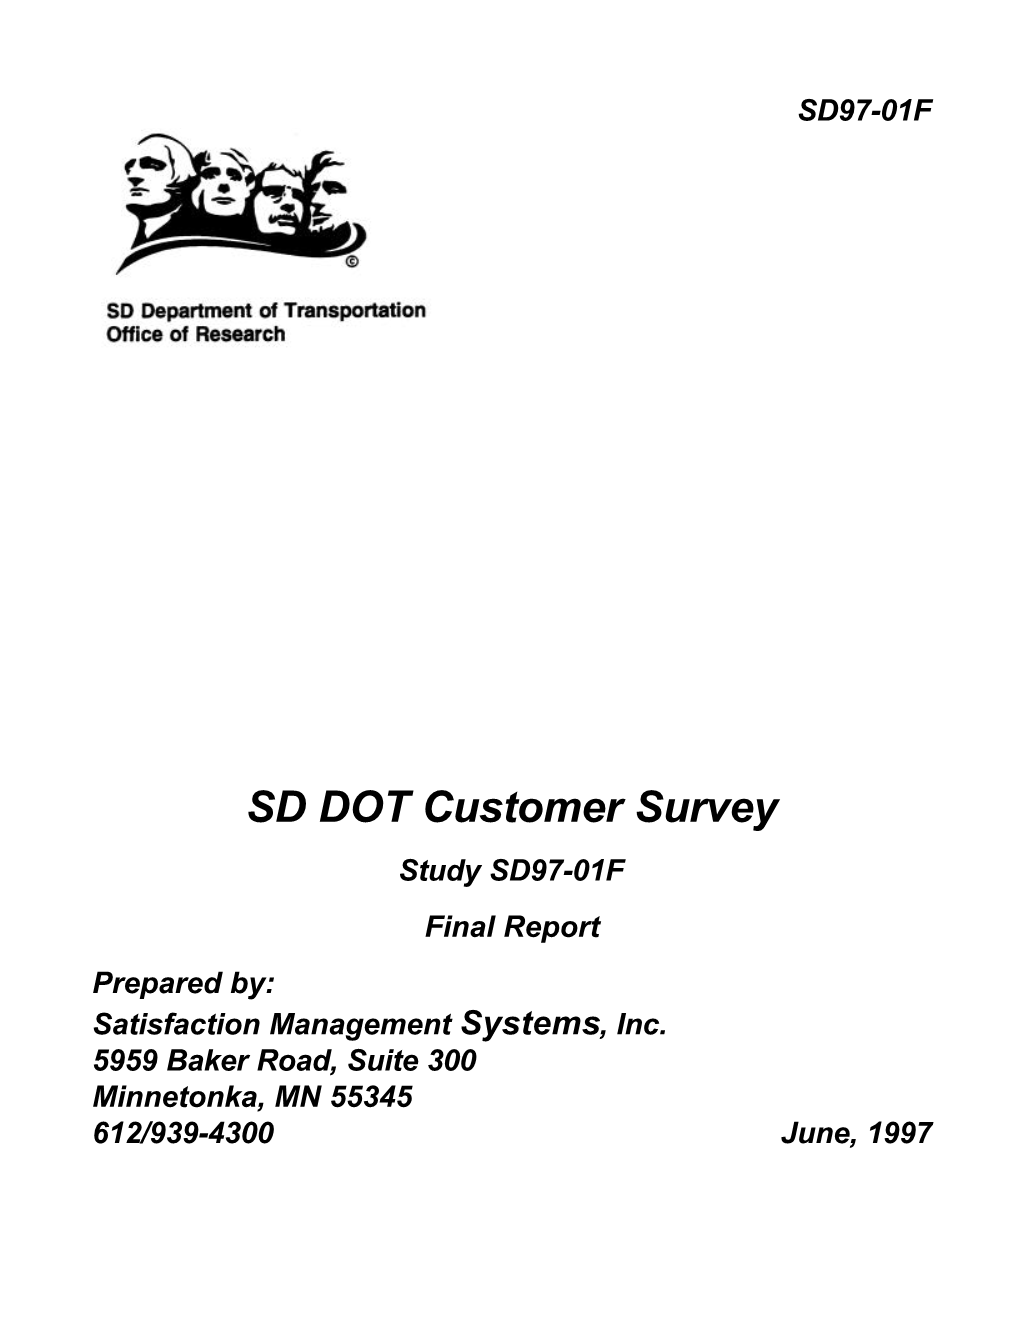 SD DOT Customer Survey Study SD97-01F Final Report Prepared By: Satisfaction Management Systems, Inc